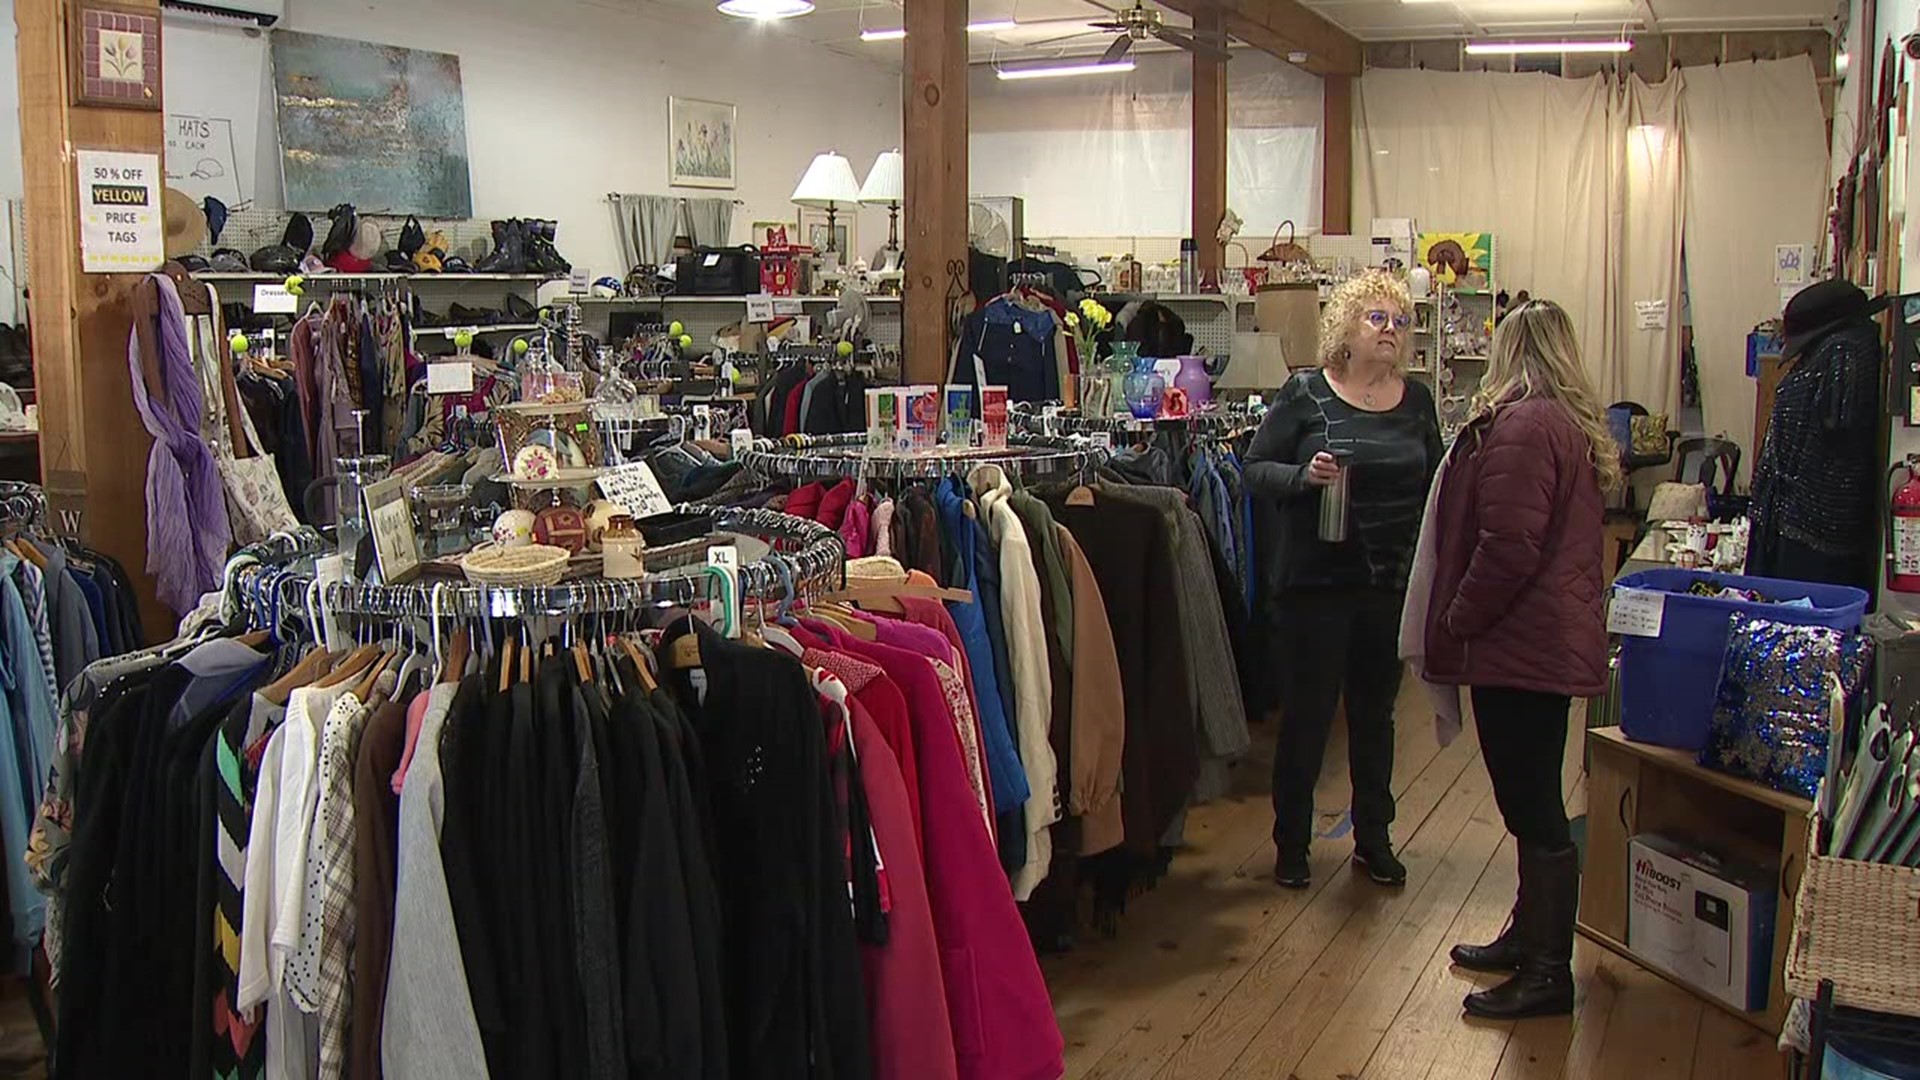 Newswatch 16's Amanda Eustice shows us how making a purchase helps those struggling with addiction go through recovery.